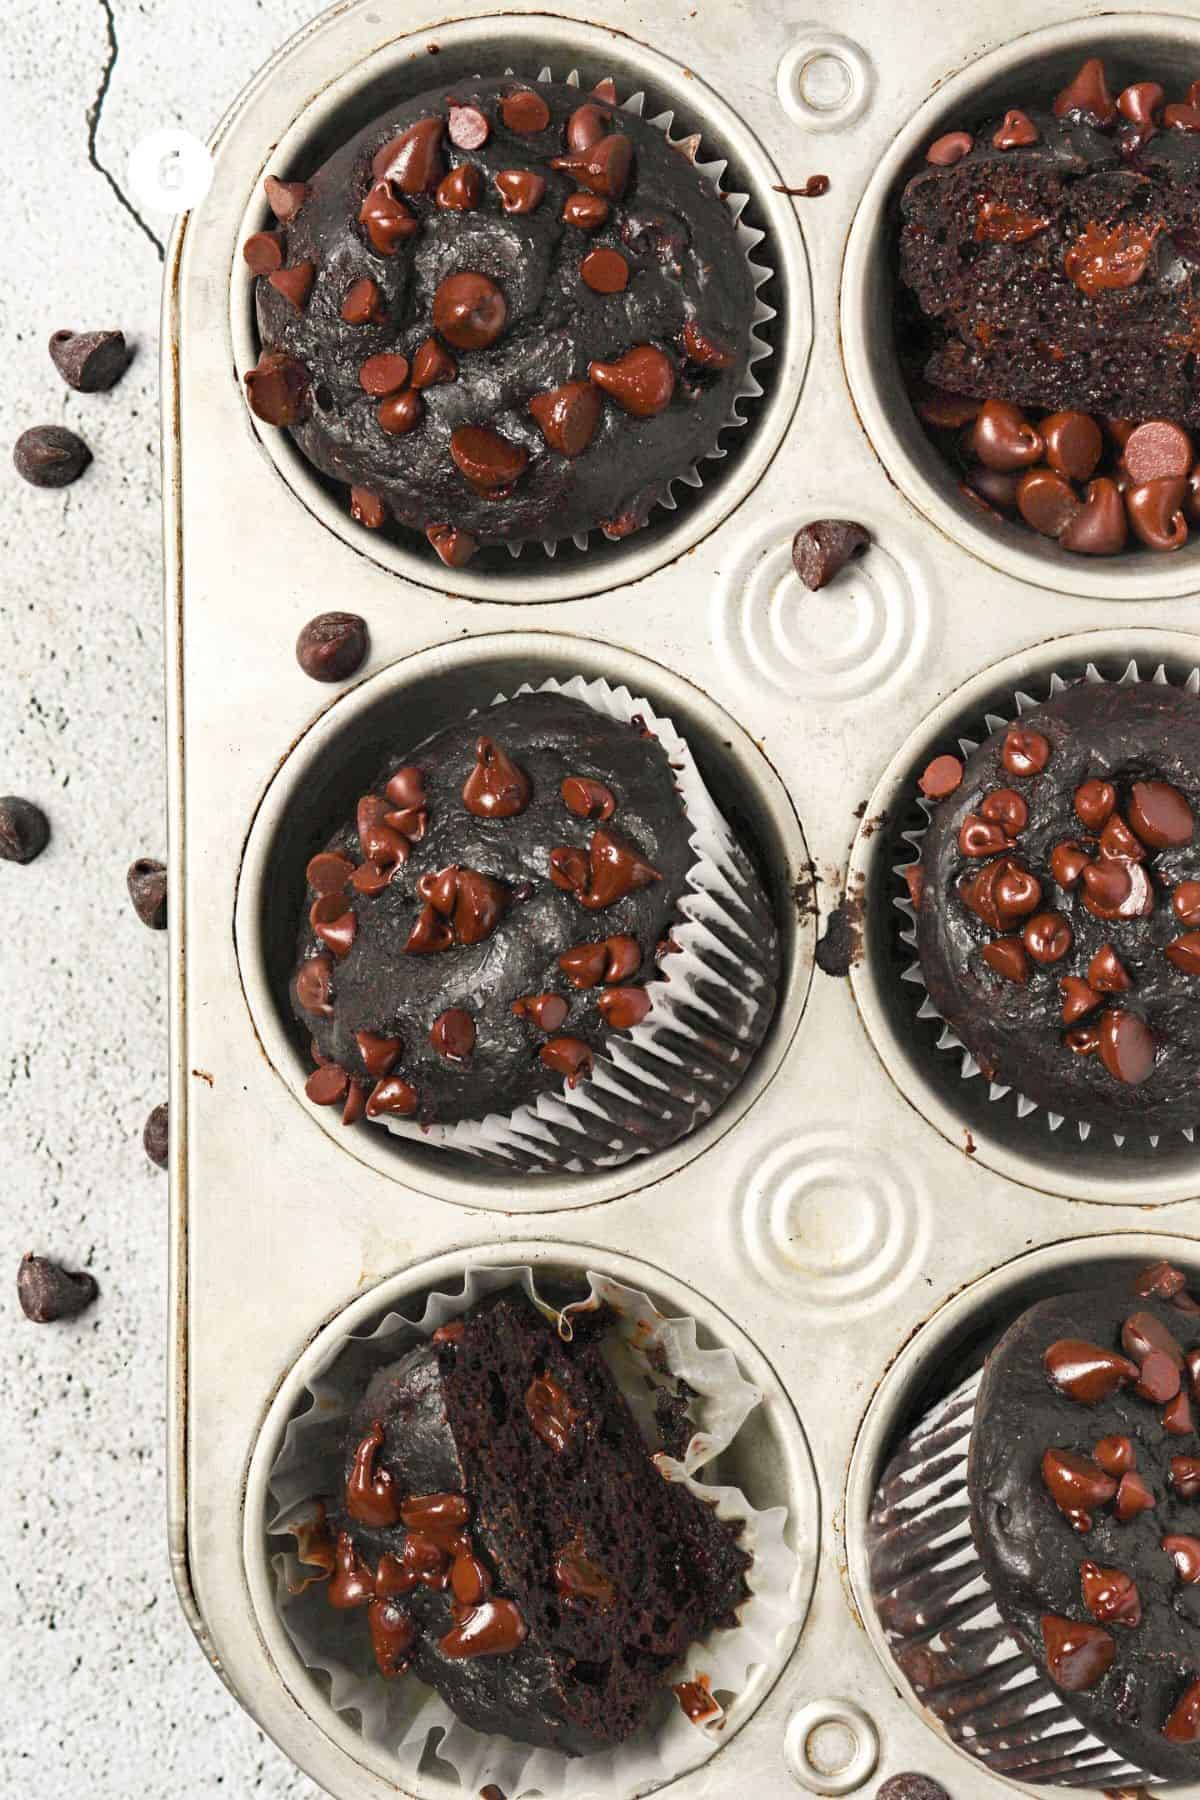 Baked muffins in a muffin tin with extra chocolate chips on top.